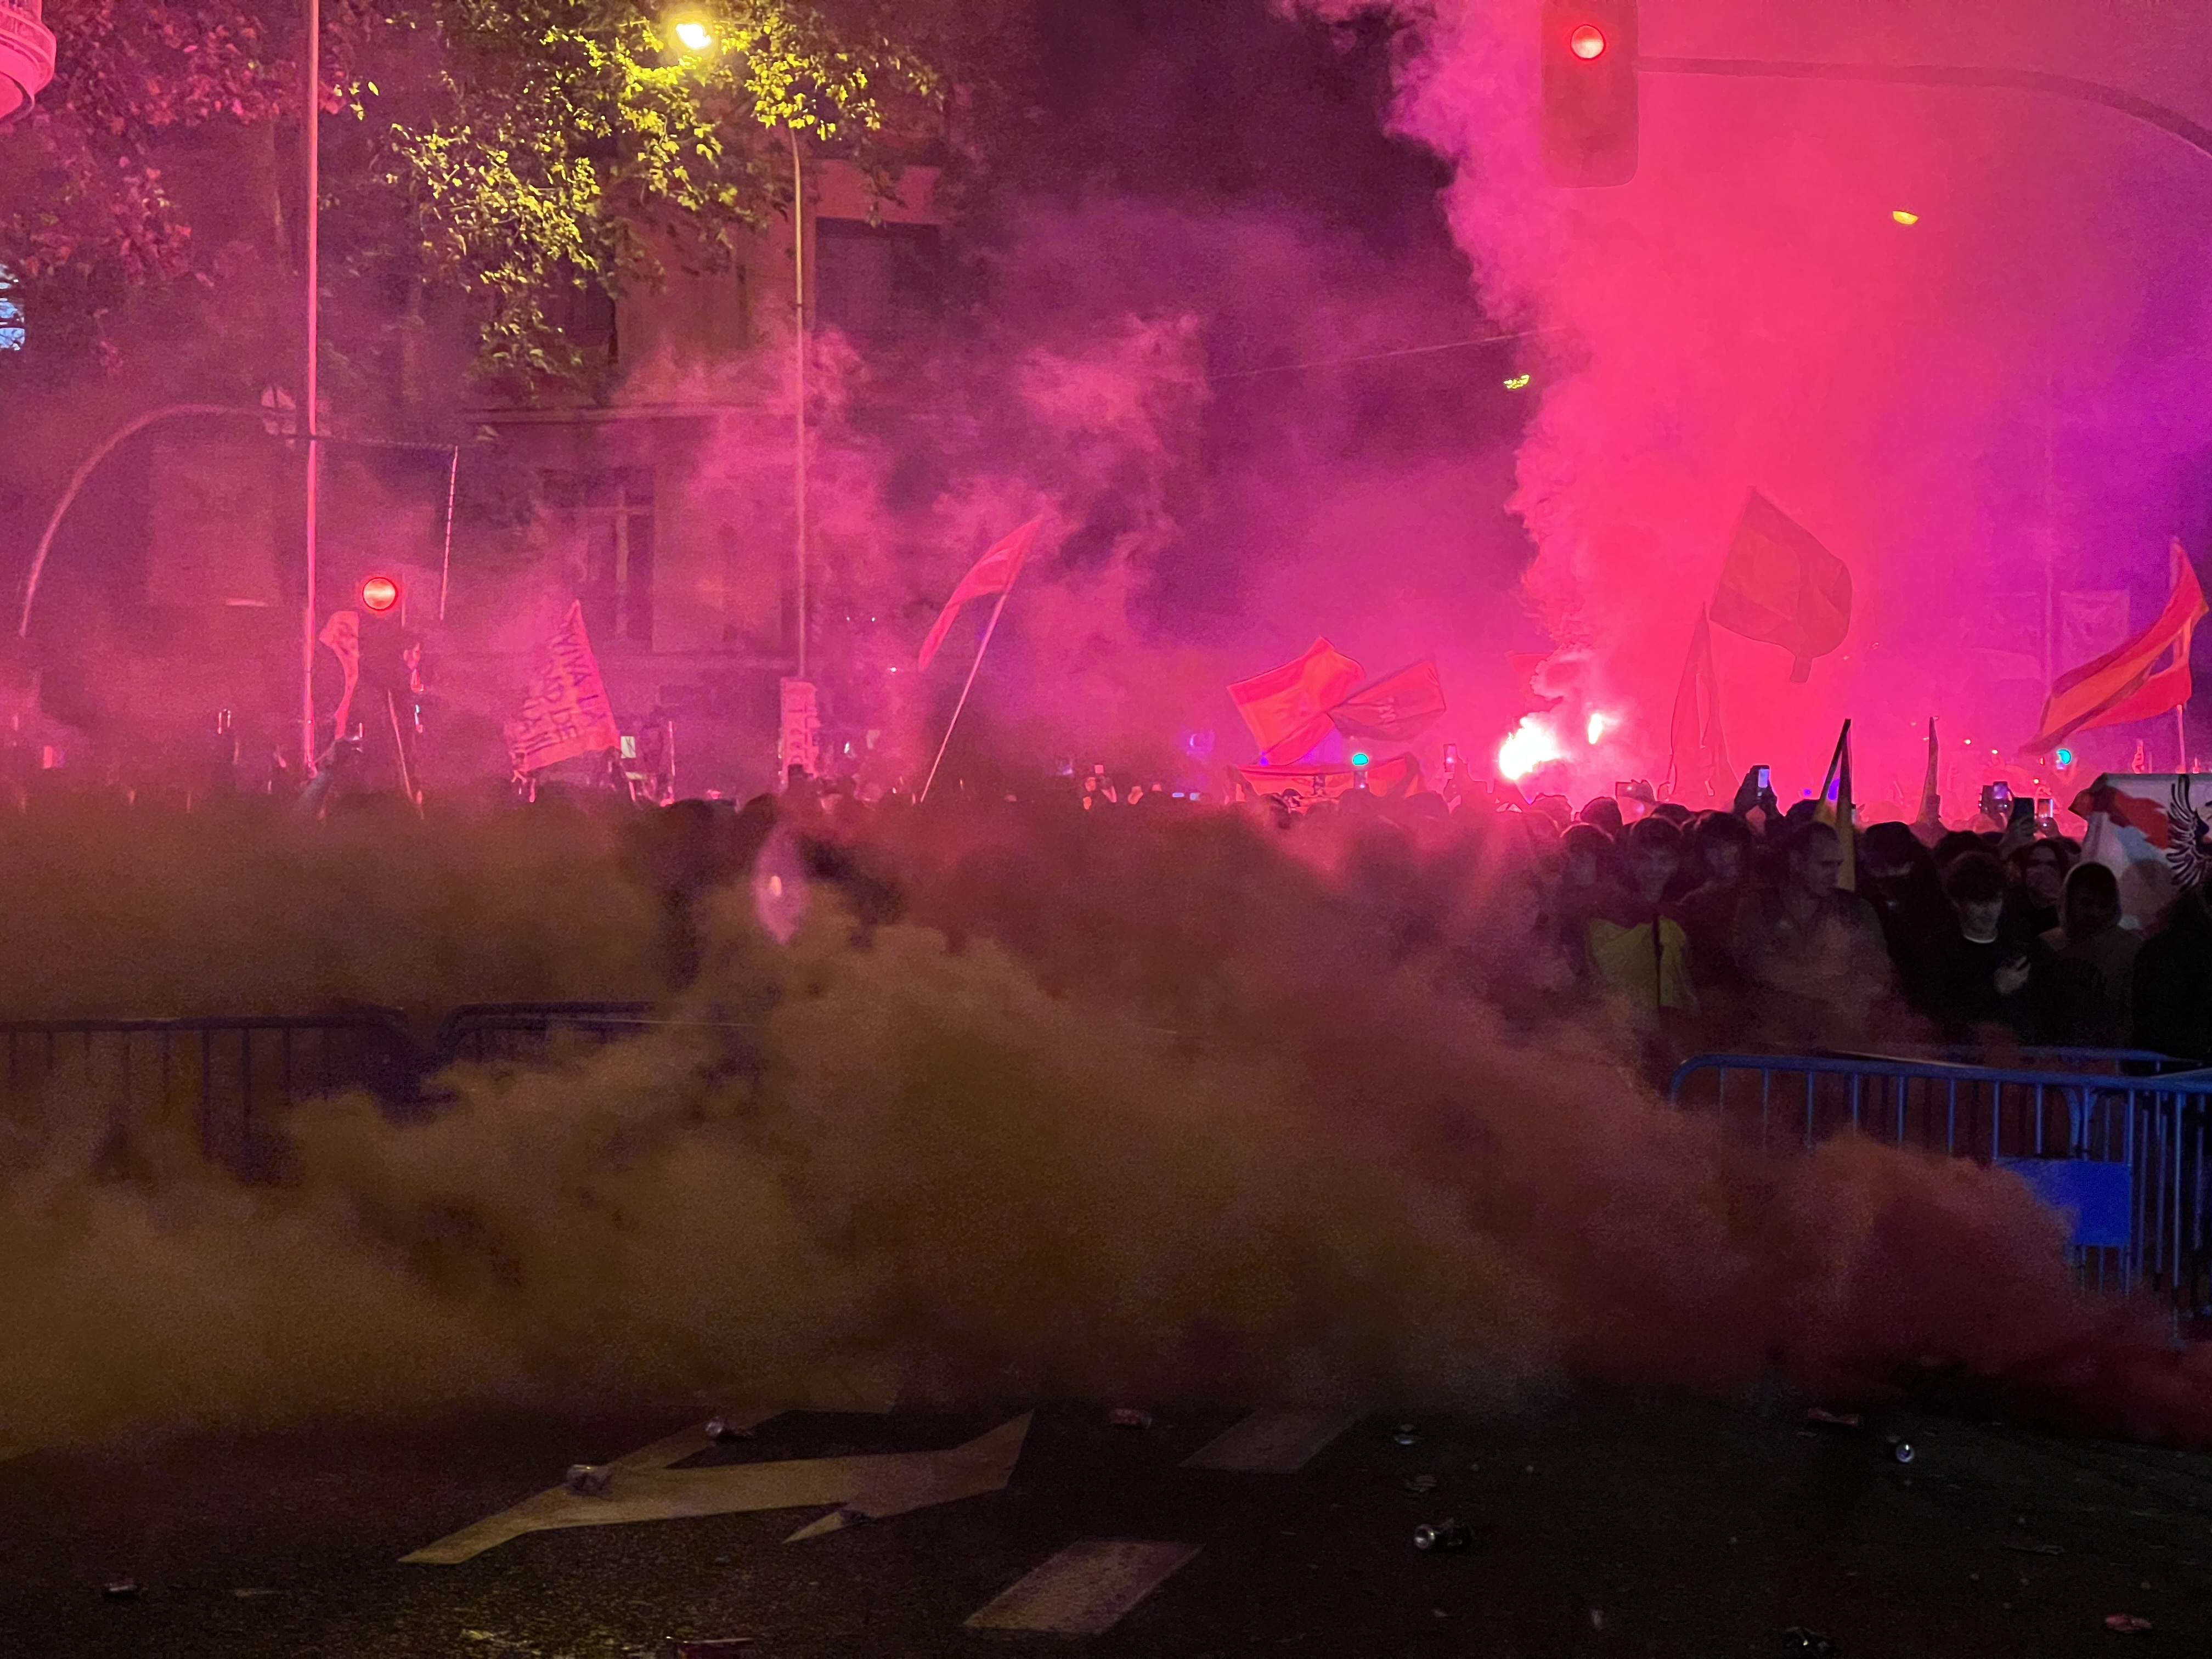 Smoke from flares during the protest